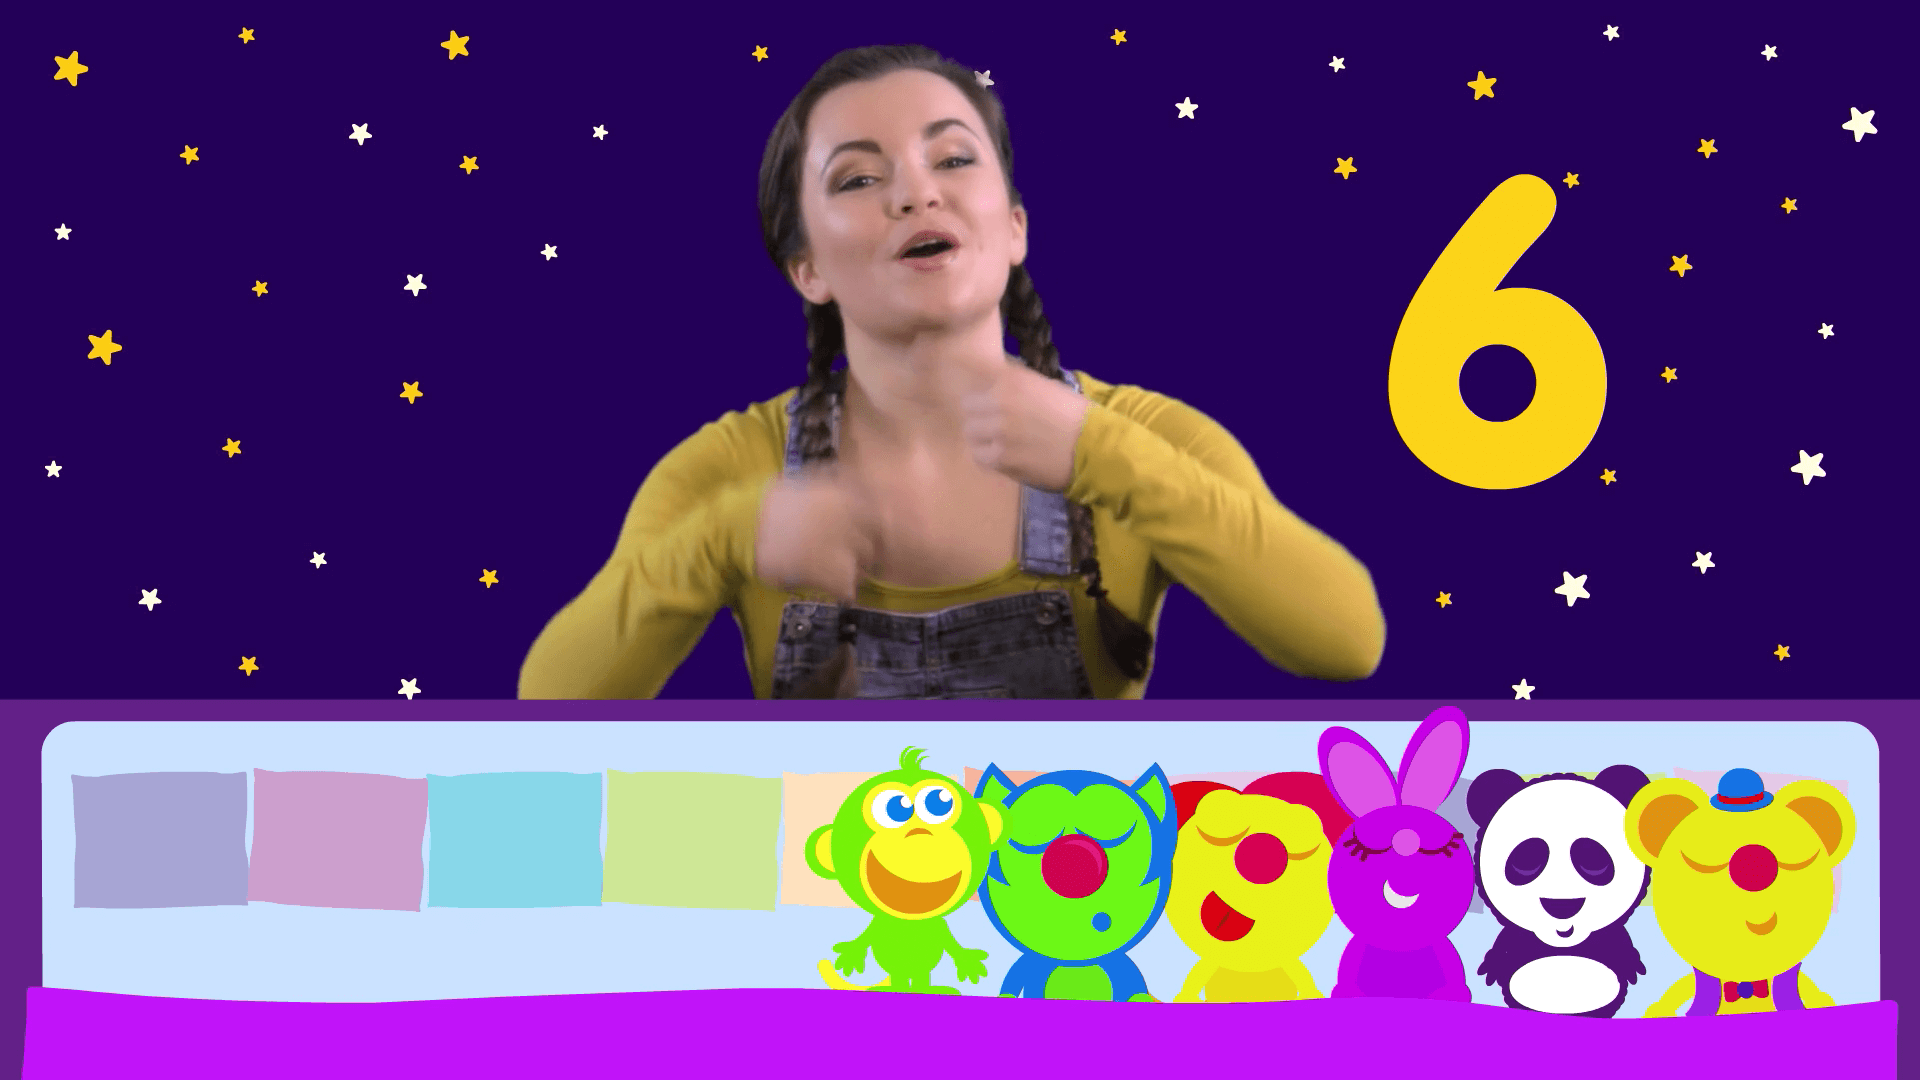 kiki sings ten in the bed title for Kiki's Music Time music video for toddlers on KneeBouncers﻿